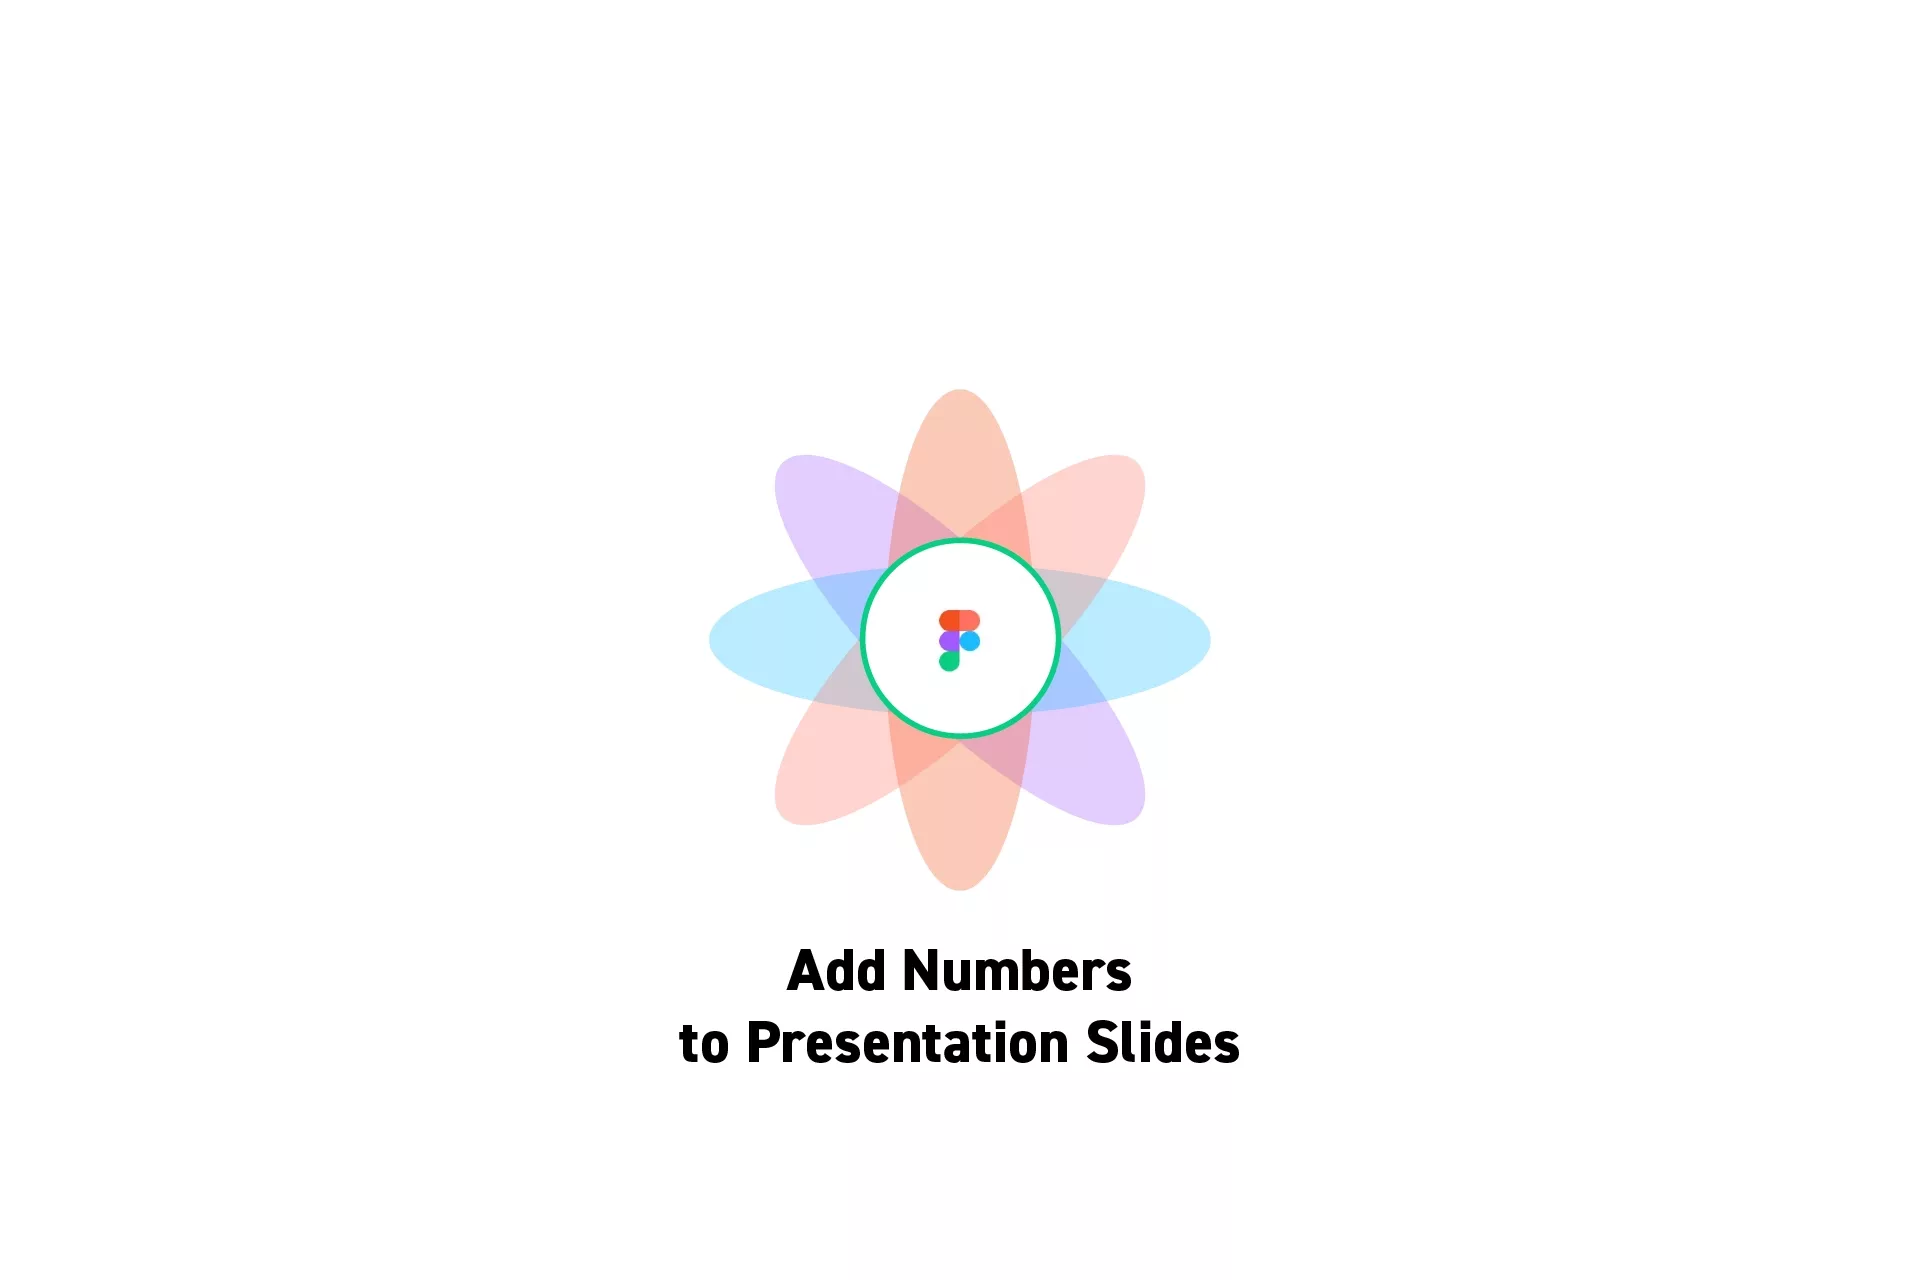 A flower that represents Figma with the text "Add Numbers to Presentation Slides" beneath it.